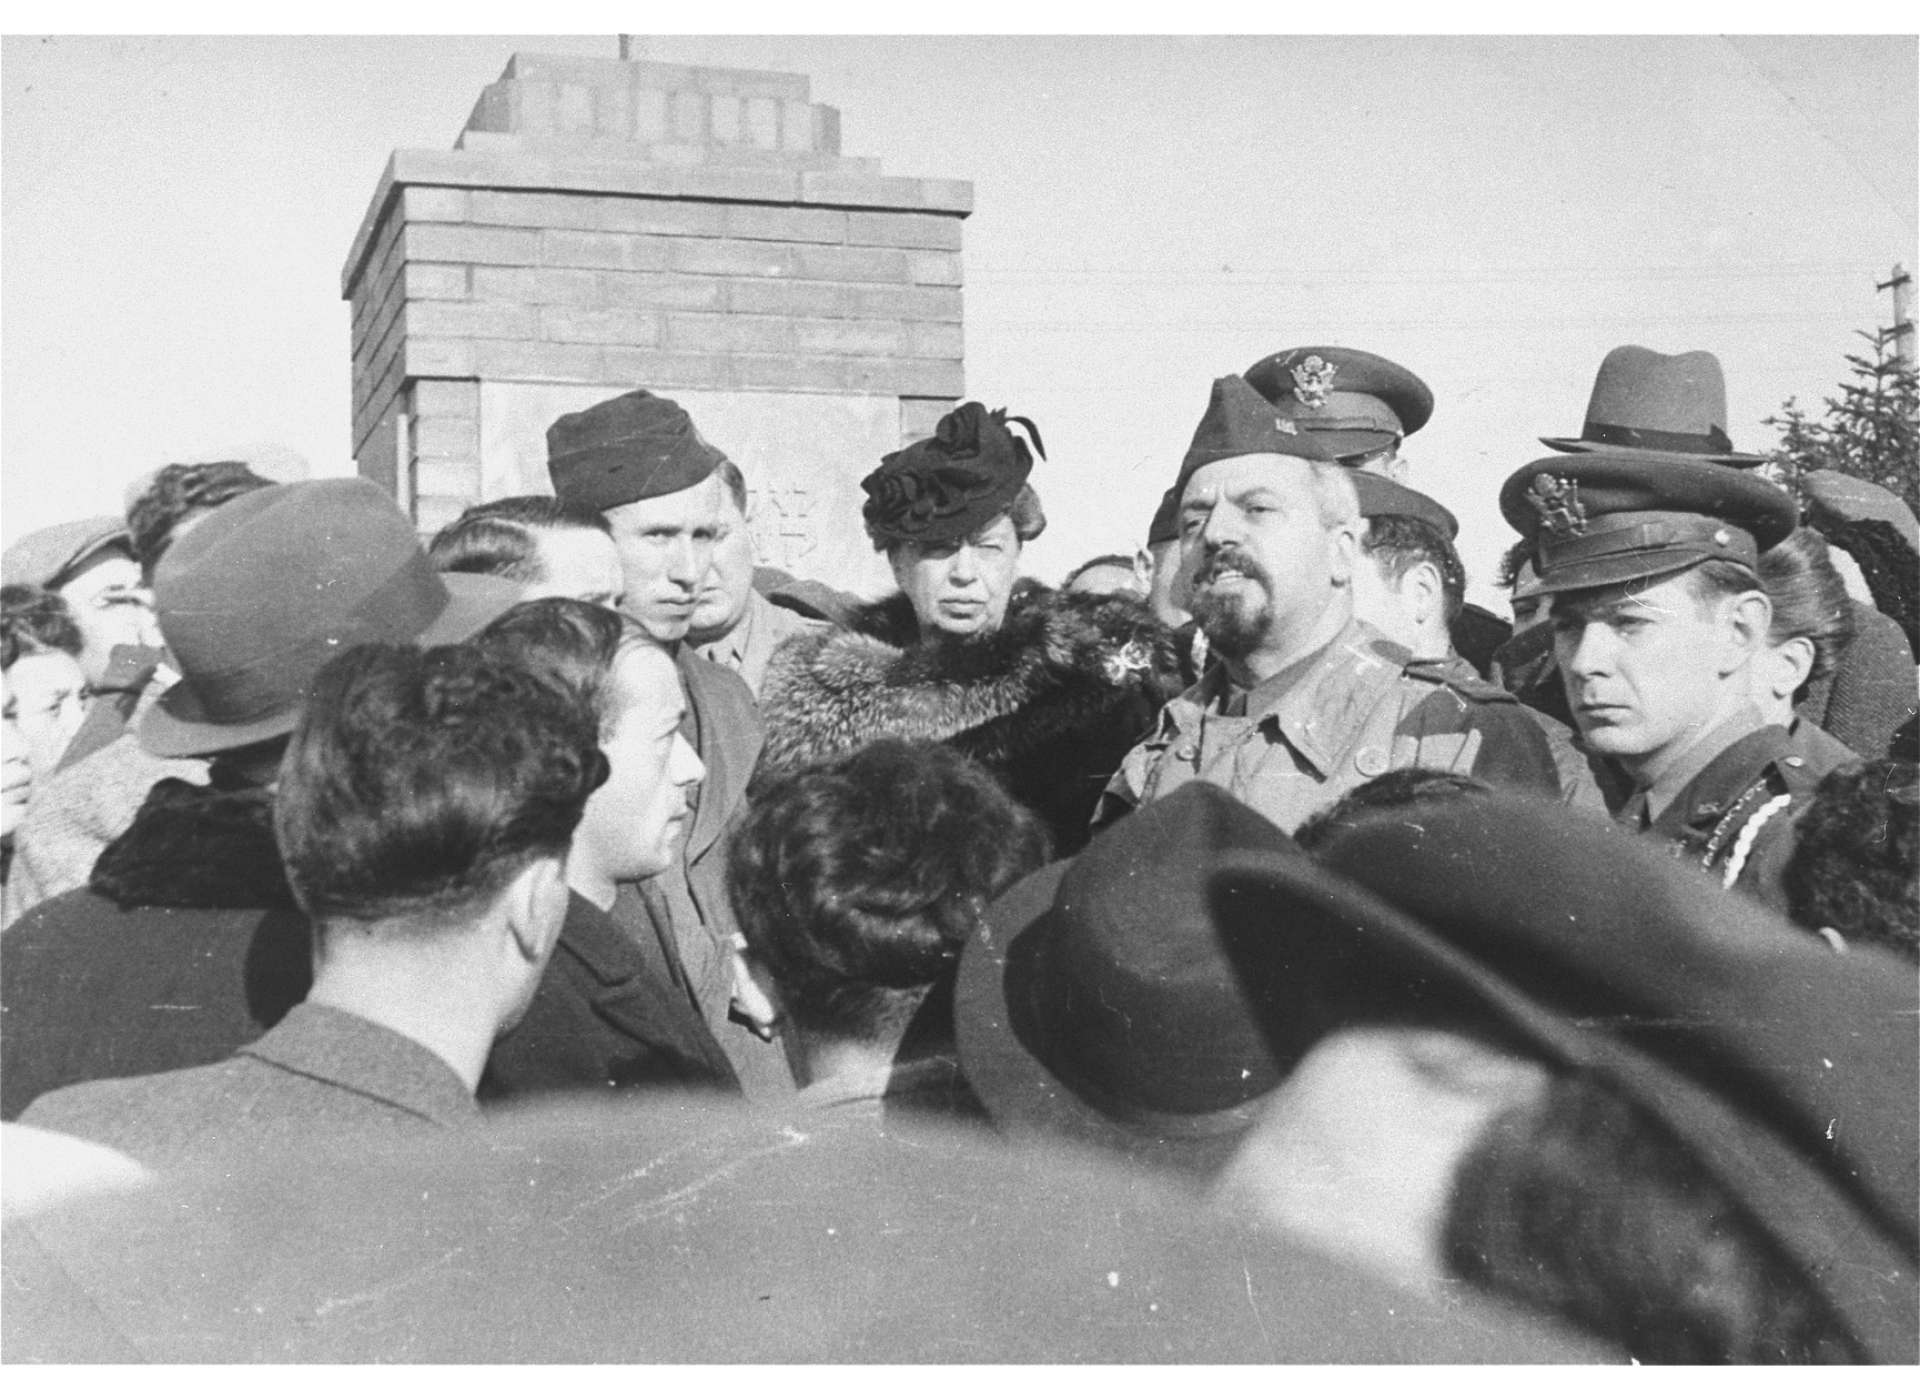 “Eleanor Roosevelt visits the Zeilsheim displaced persons&#039; camp,” E.M. Robinson, 1945-1948, Zeilsheim Germany, United States Holocaust Memorial Museum, courtesy of Alice Lev, Photograph Number: 89680.